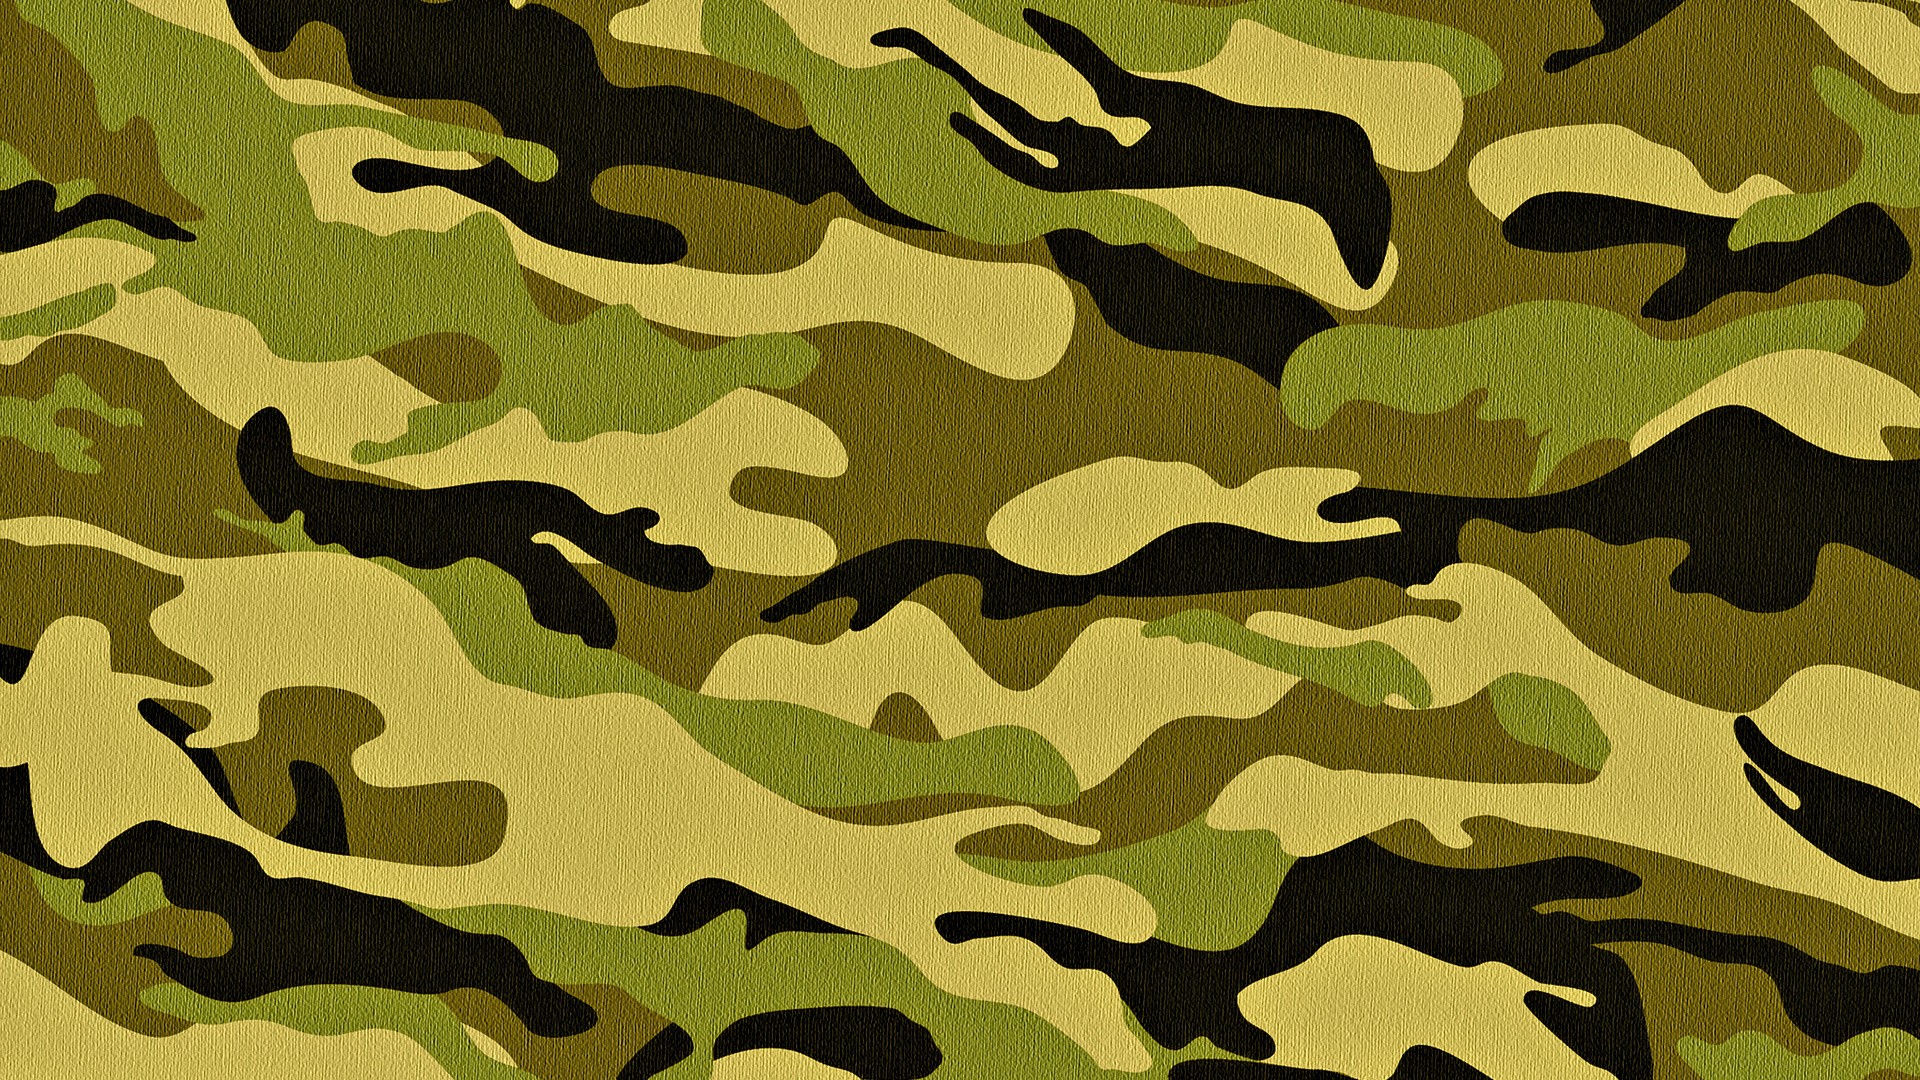  the army wallpapers category of hd wallpapers army camouflage 1920x1080